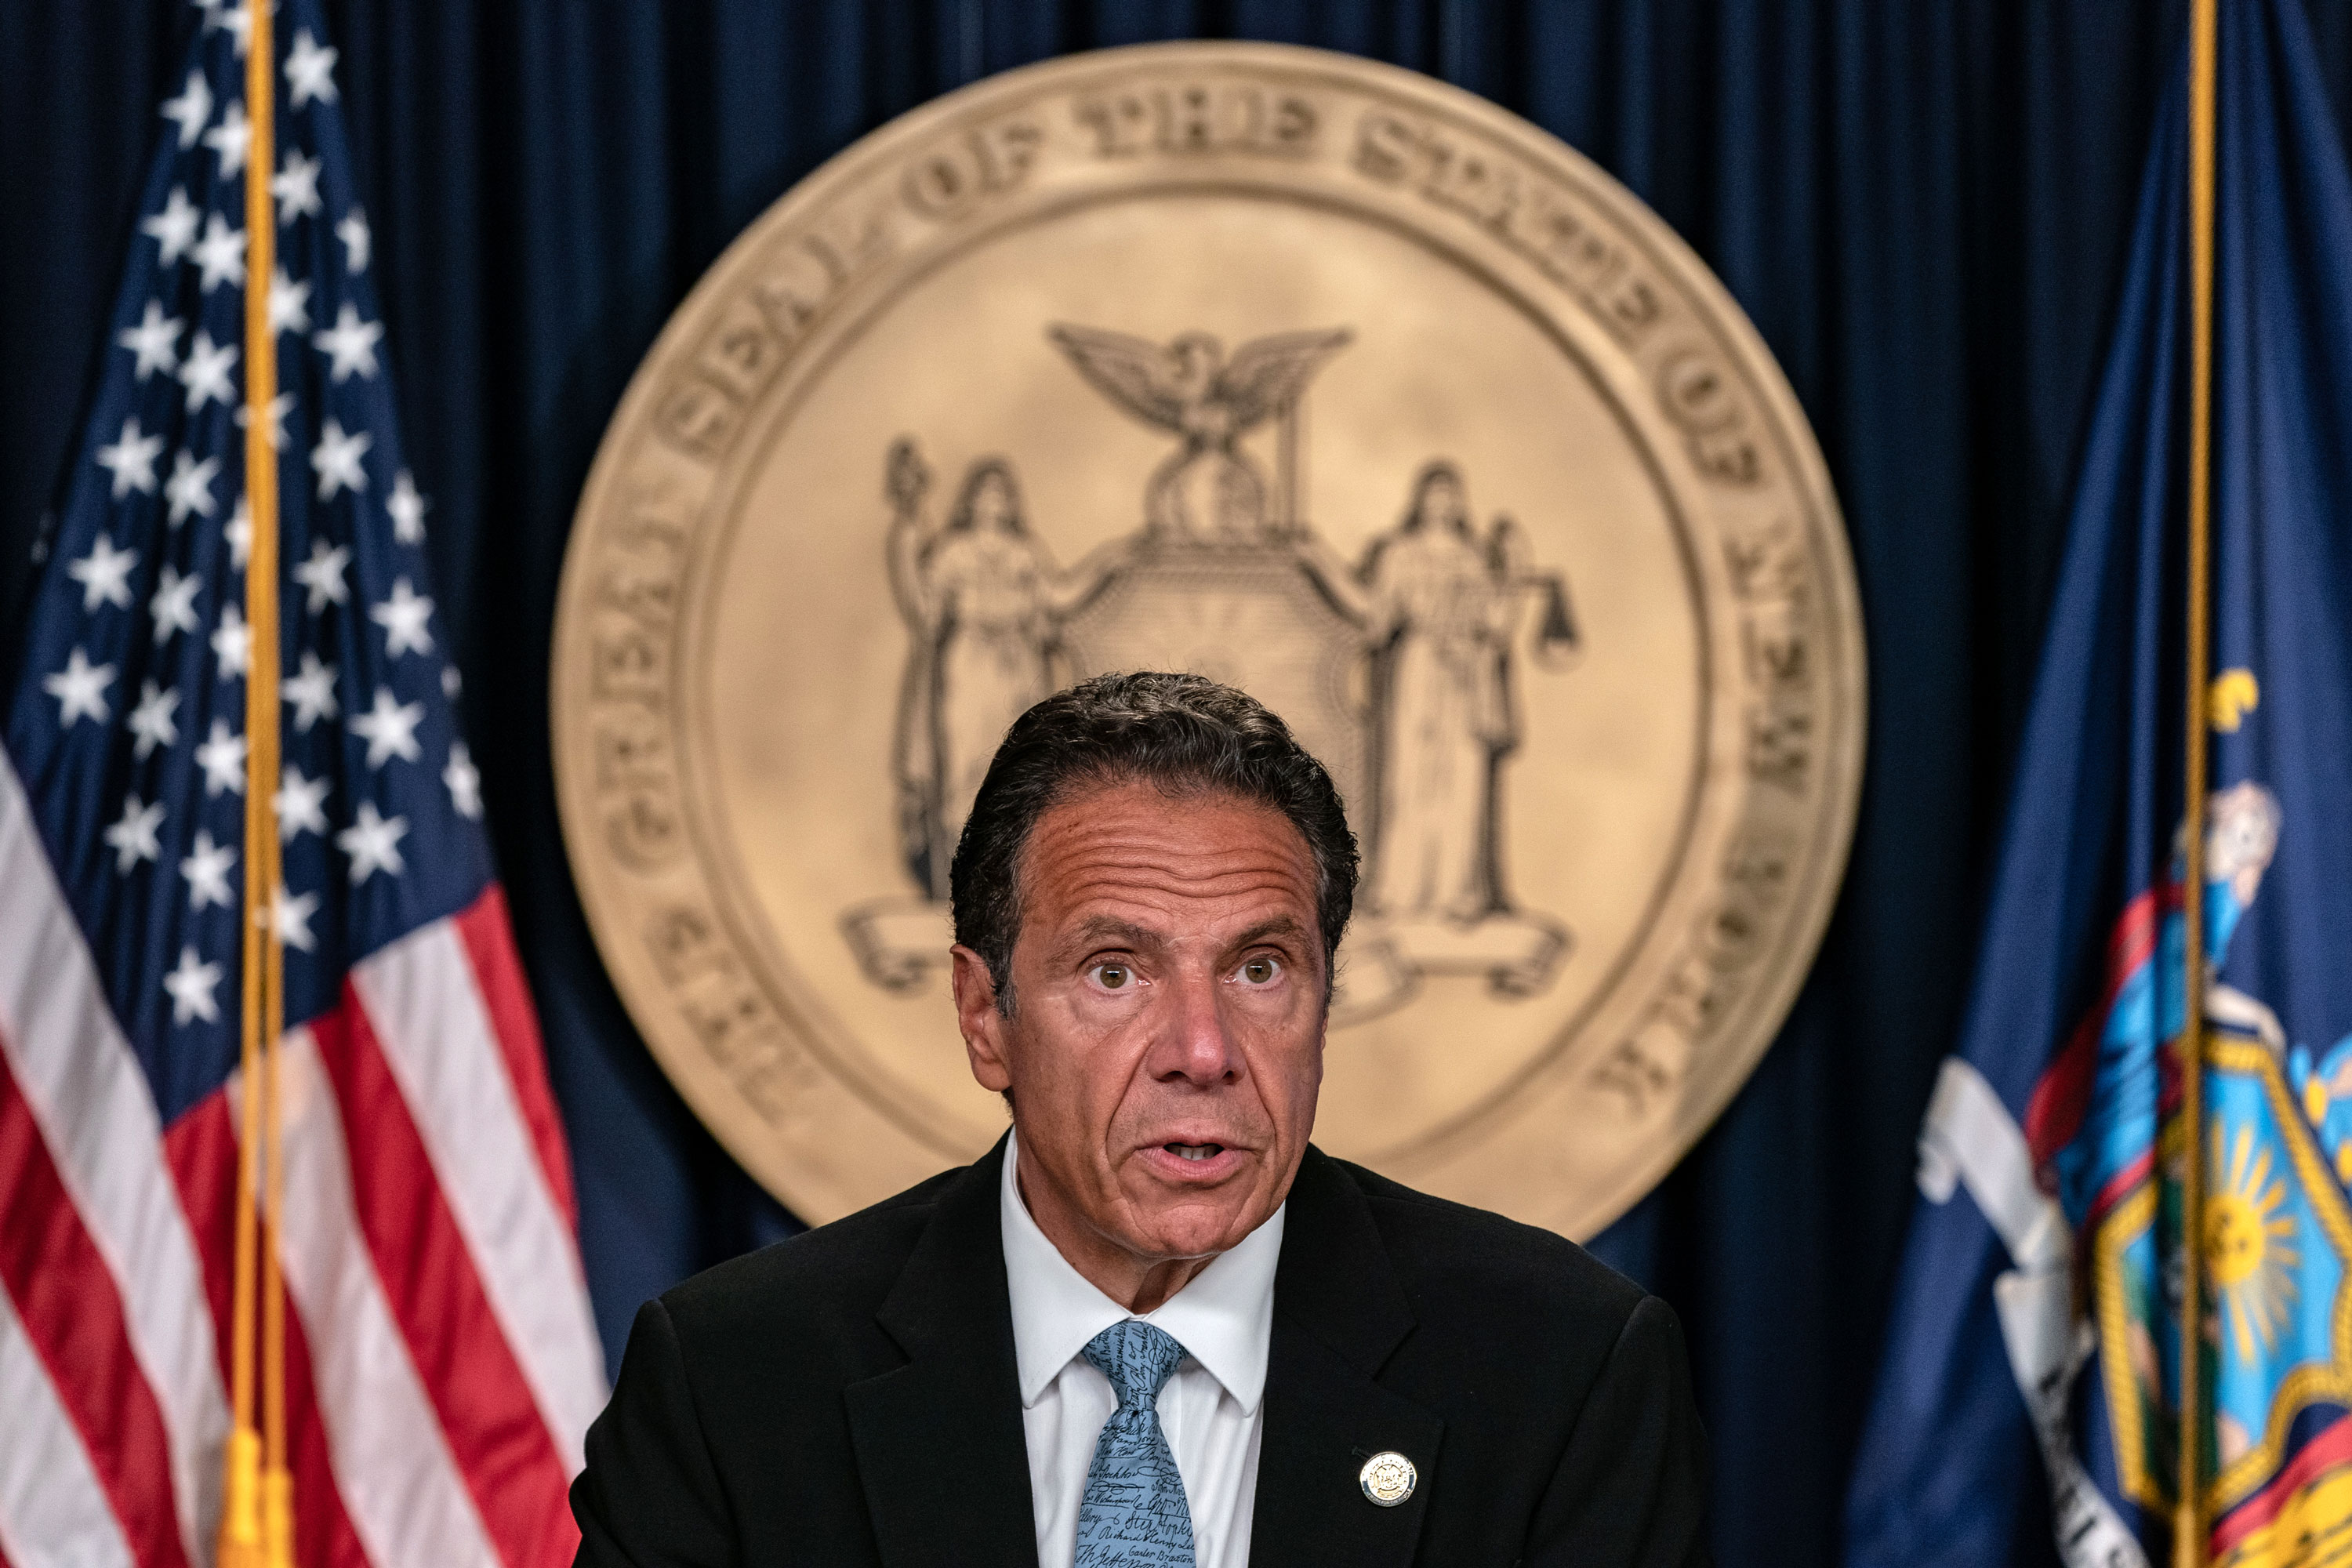 Gov. Andrew Cuomo speaks at a media briefing in New York on July 23.